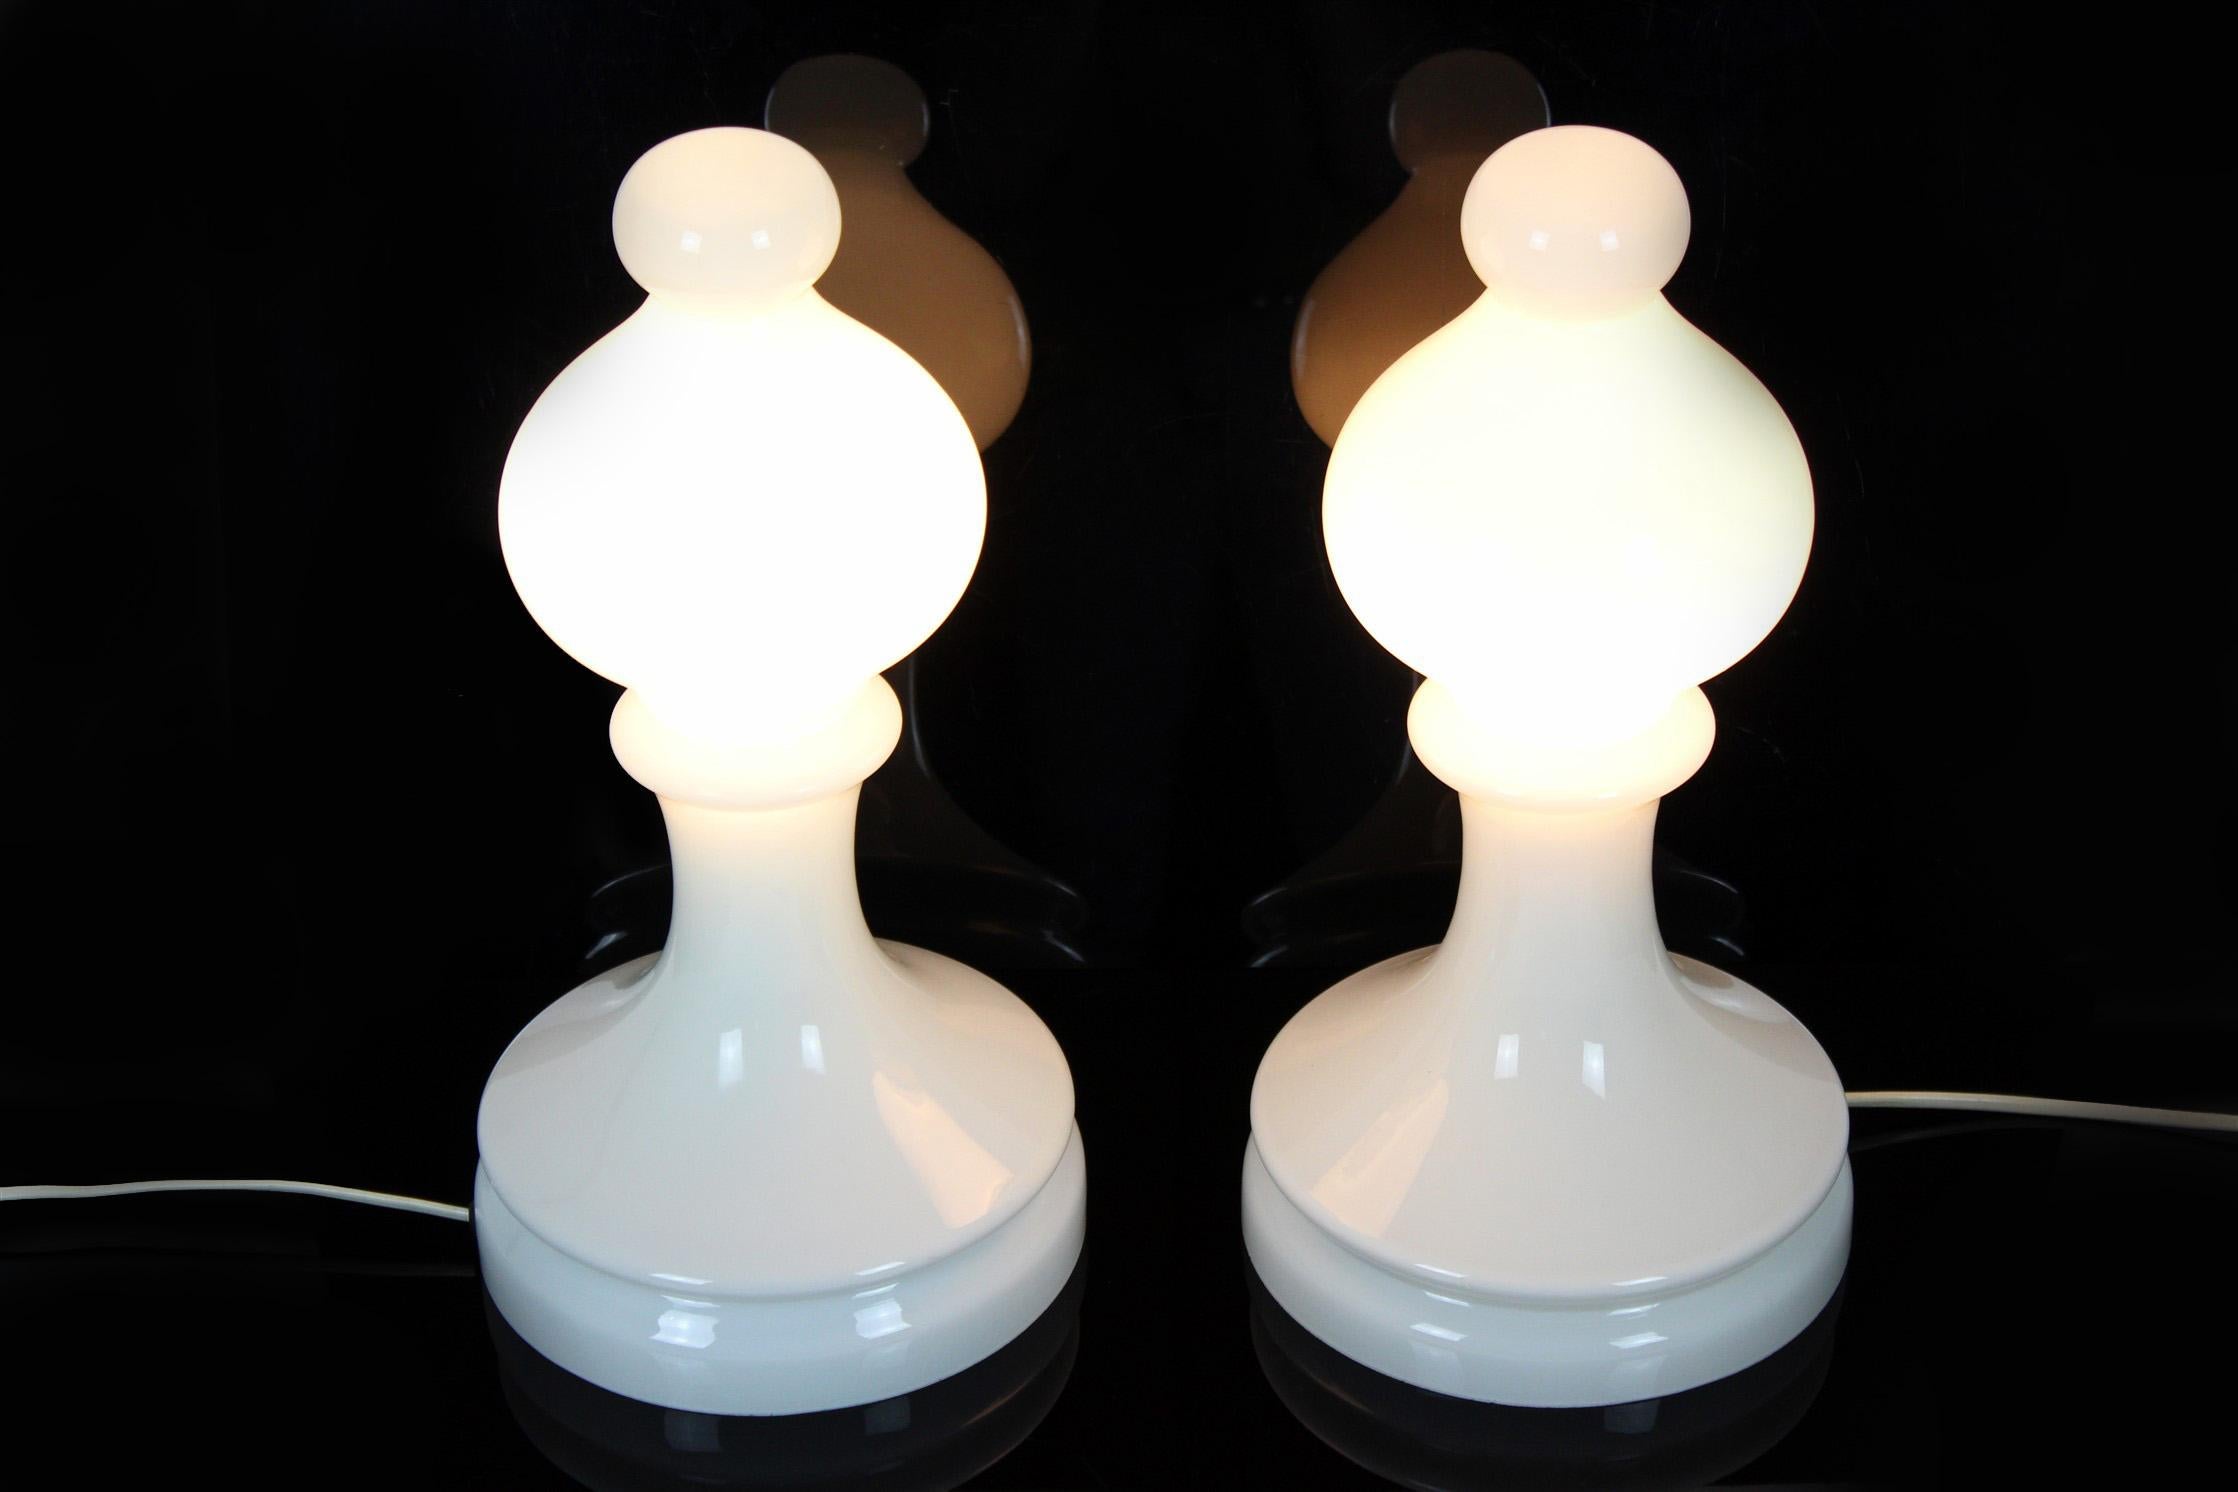 These glass lamps, made of milk white glass in a shape of a chess bishop, were designed by Ivan Jakeš and produced by Osvetlovací Sklo Valašské Mezirící in Czechoslovakia in the 1970s. The lamps are in very good vintage condition, fully functional.